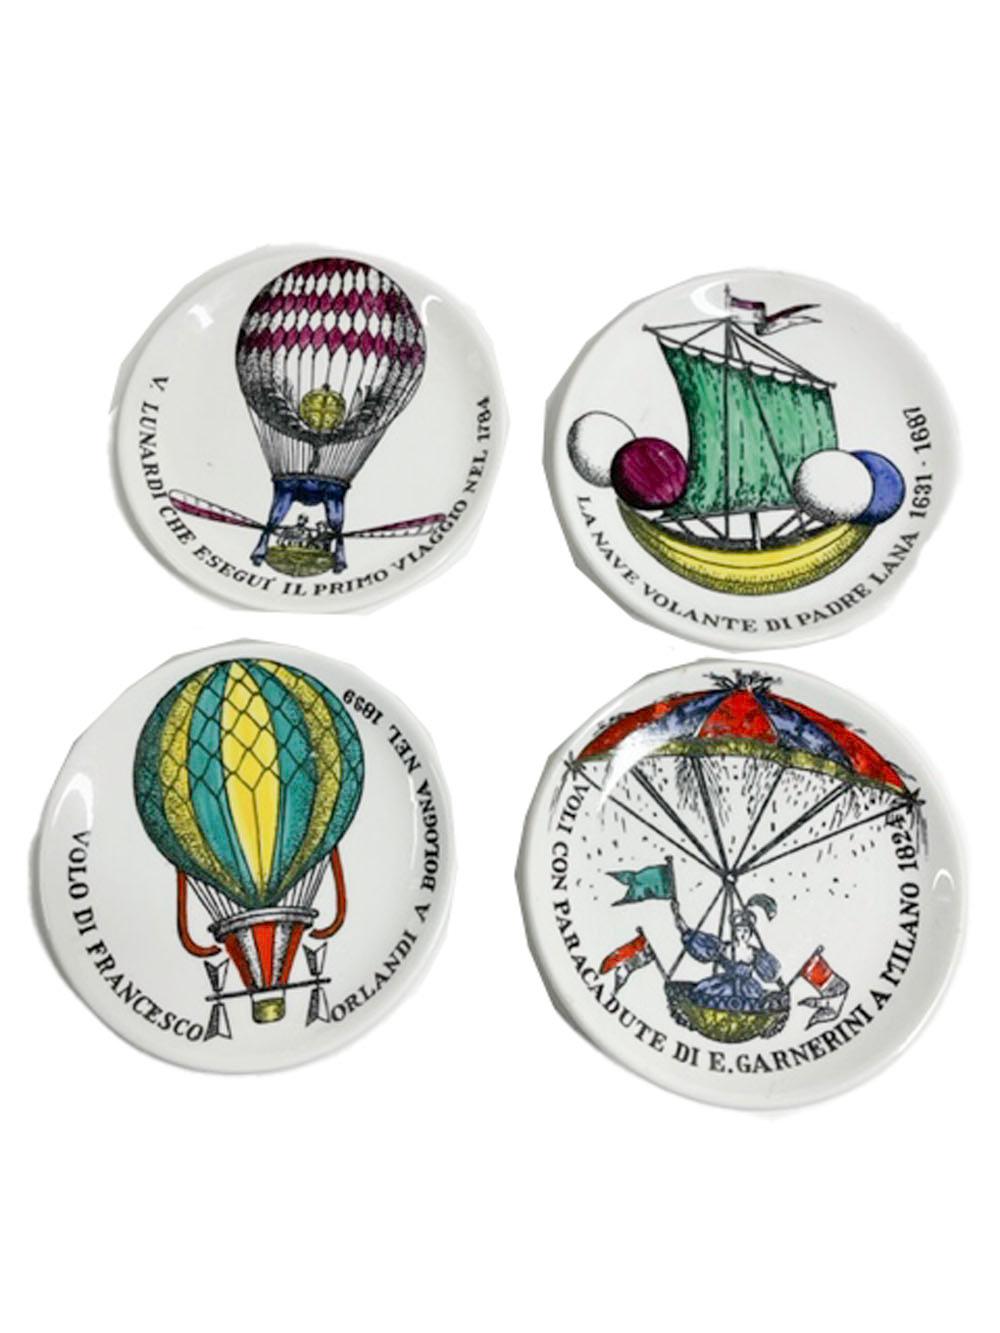 MCM Ceramic Coasters by Fornasetti, Painted with Hot Air Balloons, 